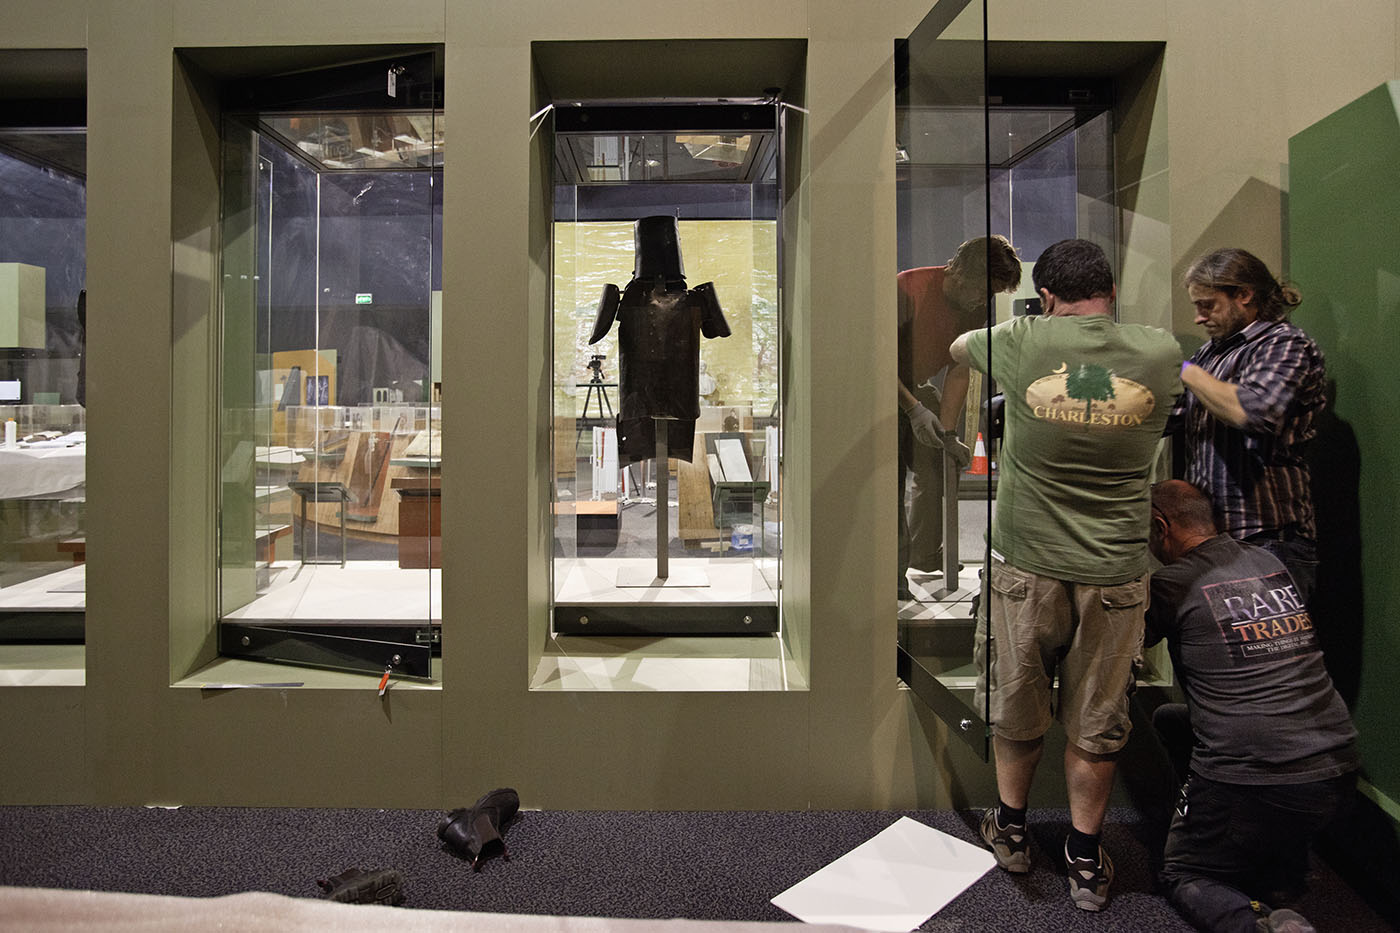 Staff working on installing armoury for an exhibition. - click to view larger image